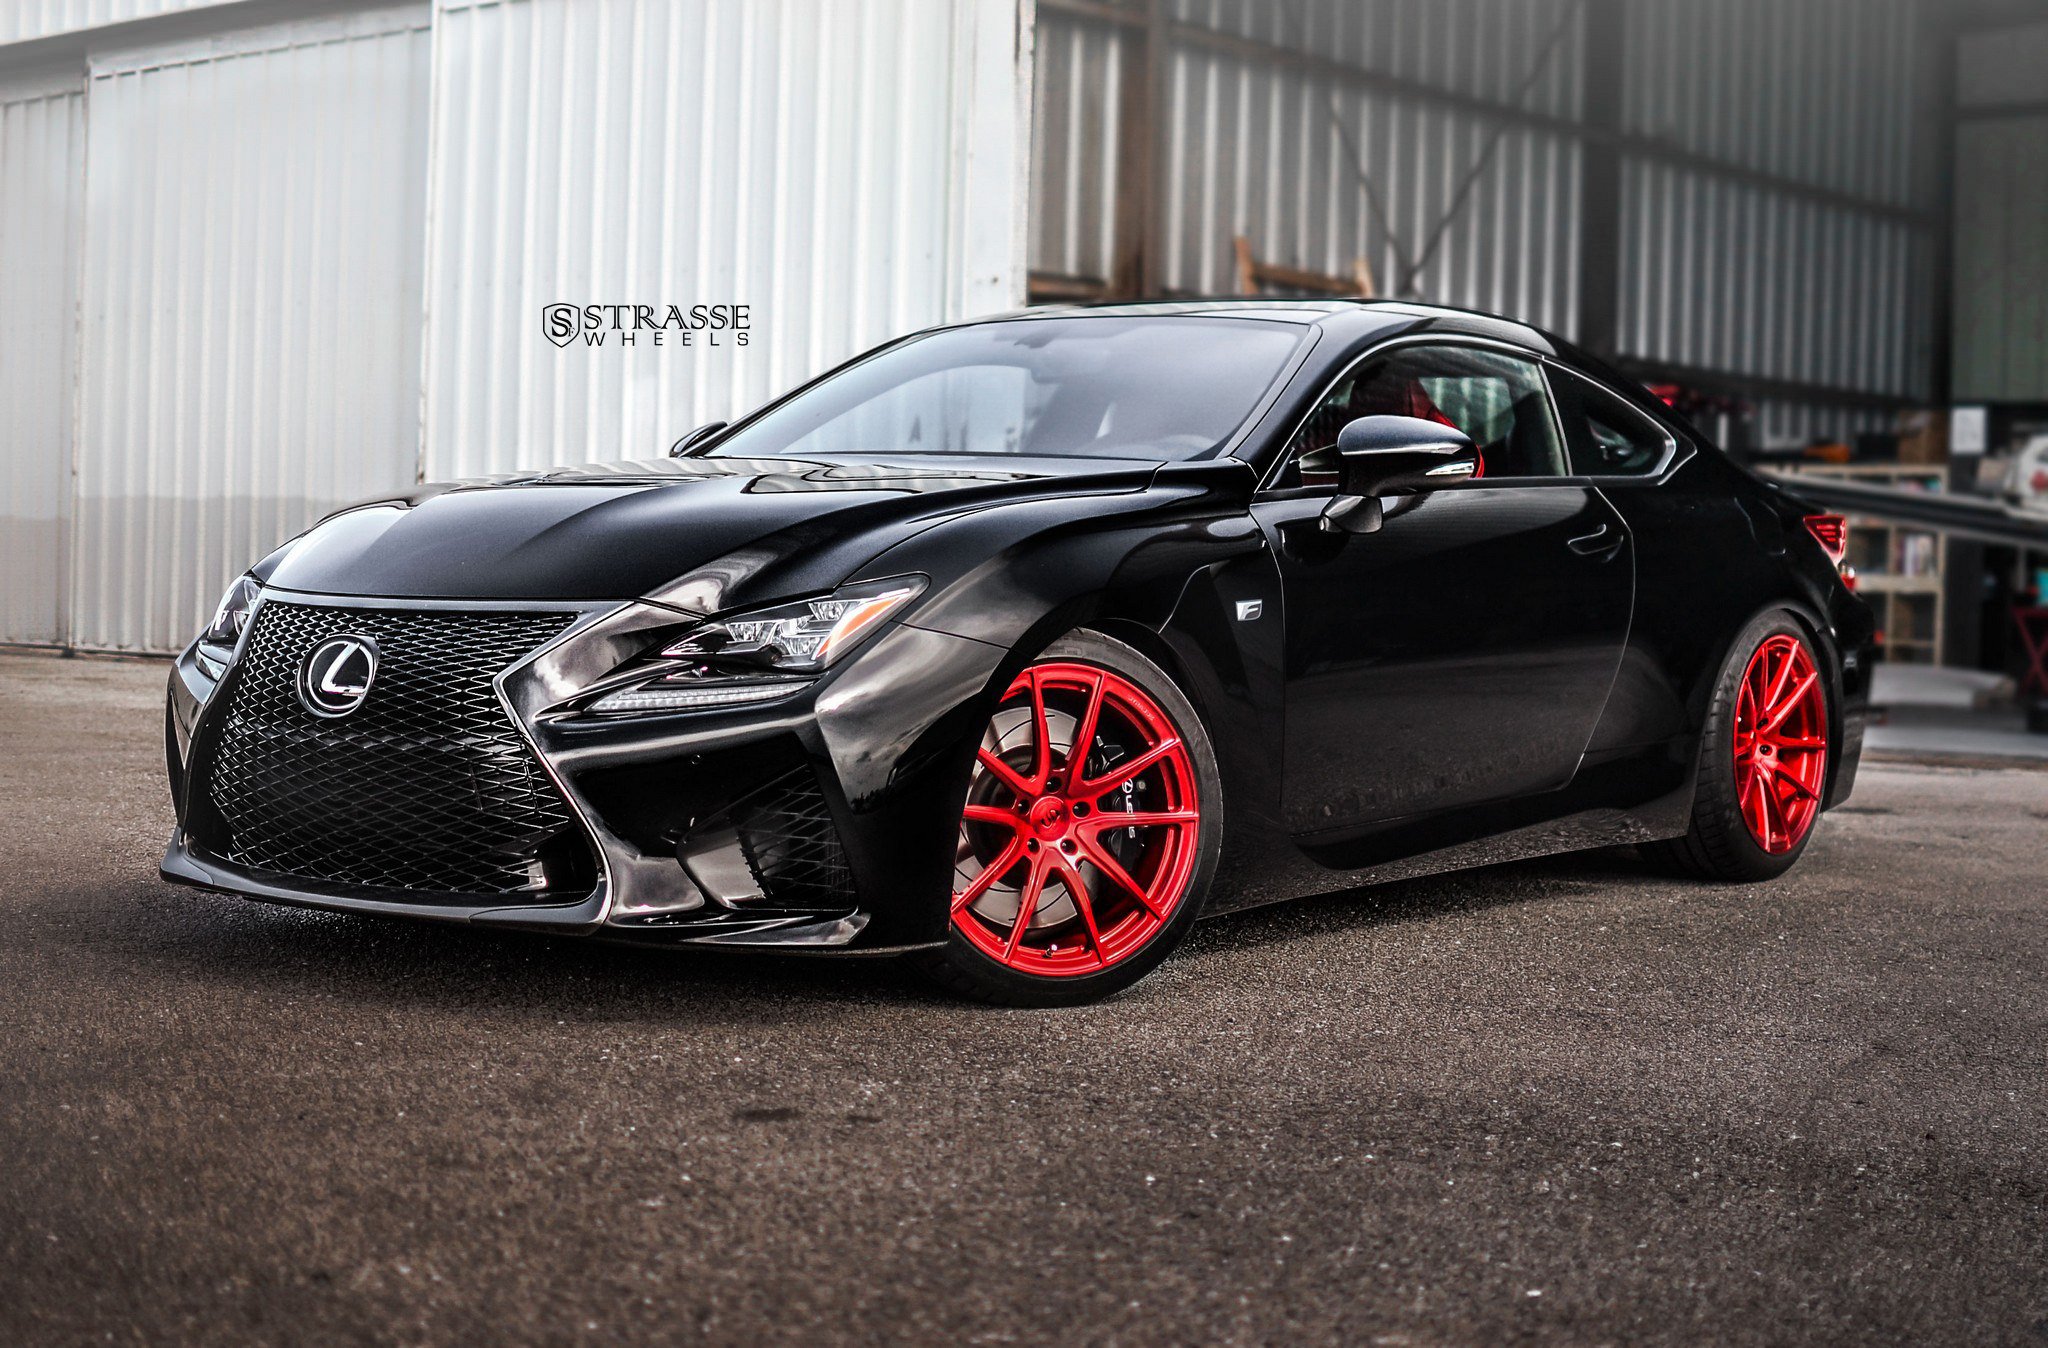 strasse, Wheels, Gallery, Lexus, Rc f, Black, Cars, Coupe Wallpaper